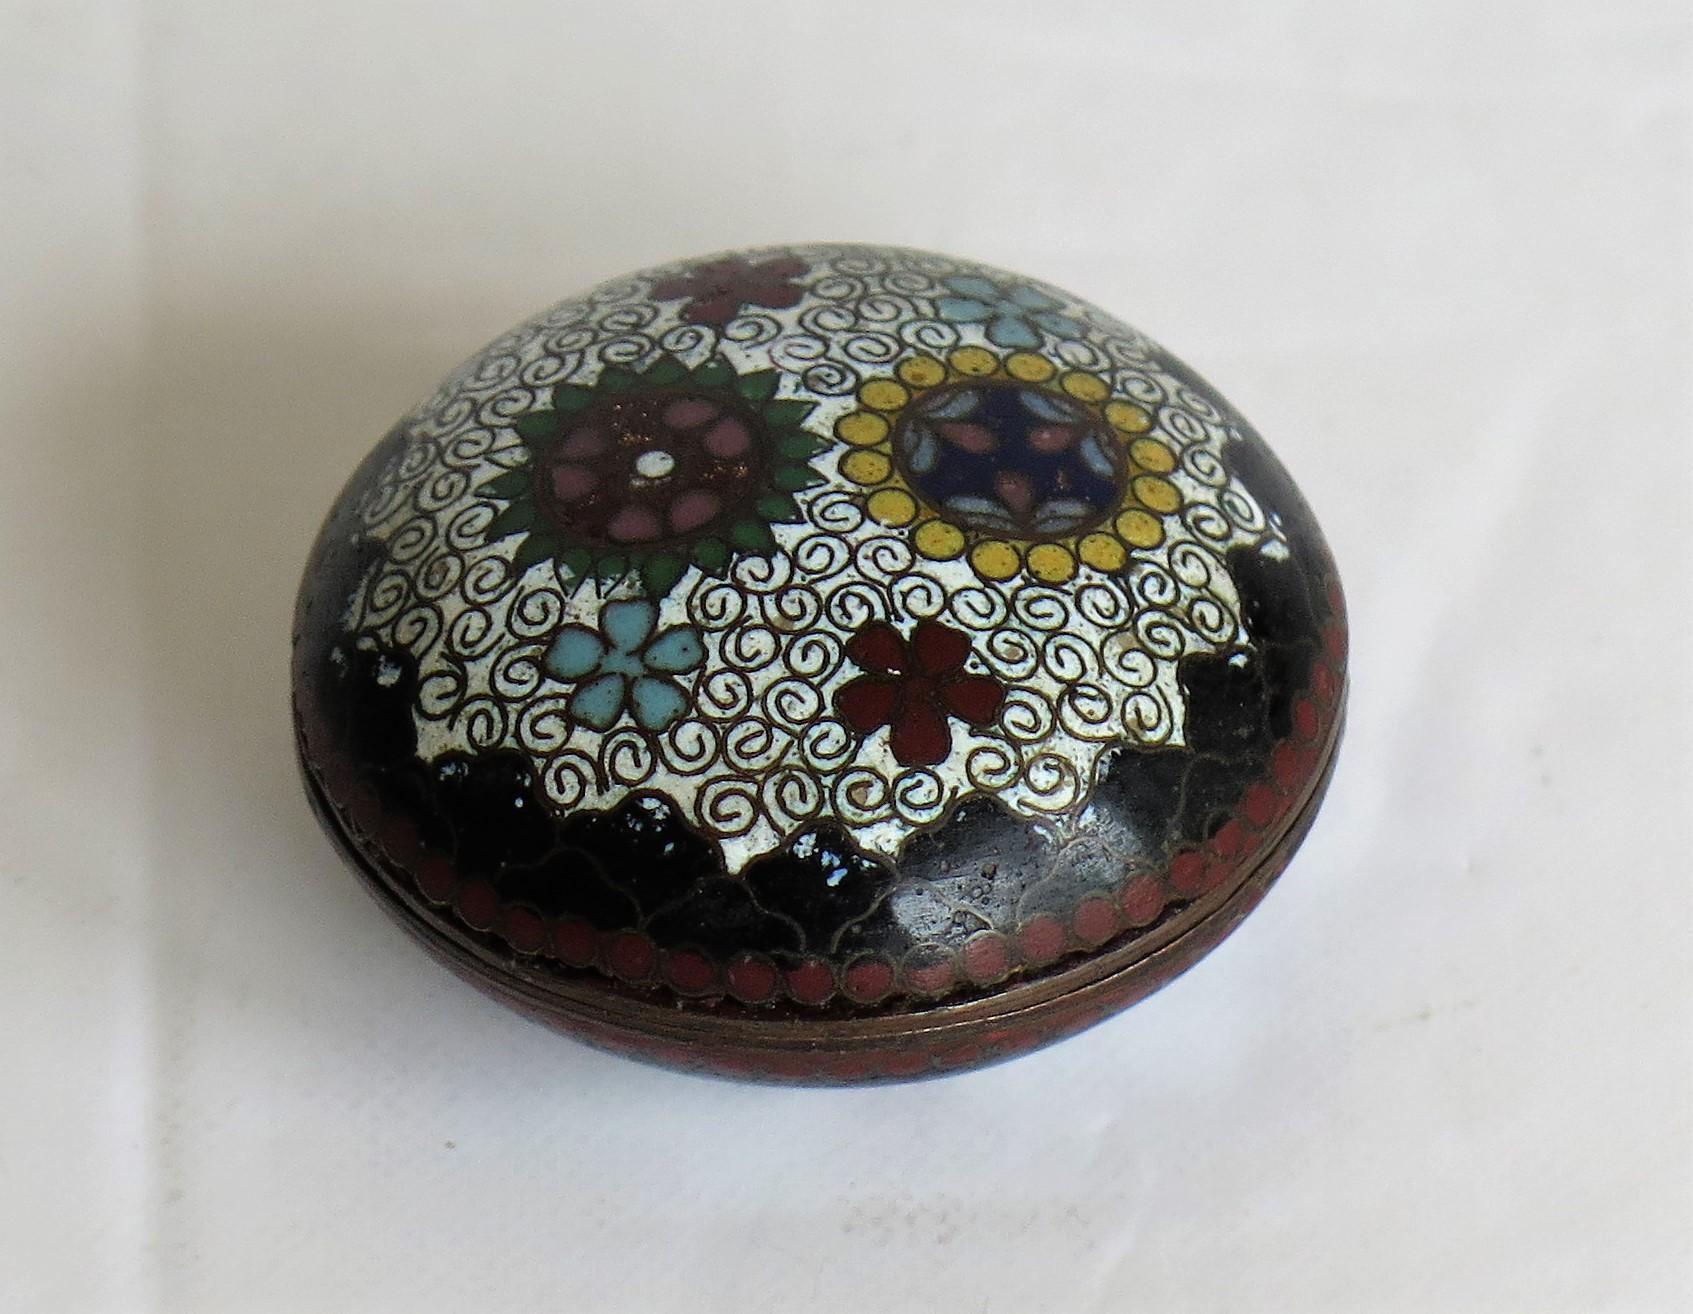 This is a very decorative small cloisonné lidded box, made in China during the Qing dynasty and dating to the mid-19th century.

The box has a circular shape with a domed lid. It has been well made of a bronze alloy with enamels of many different